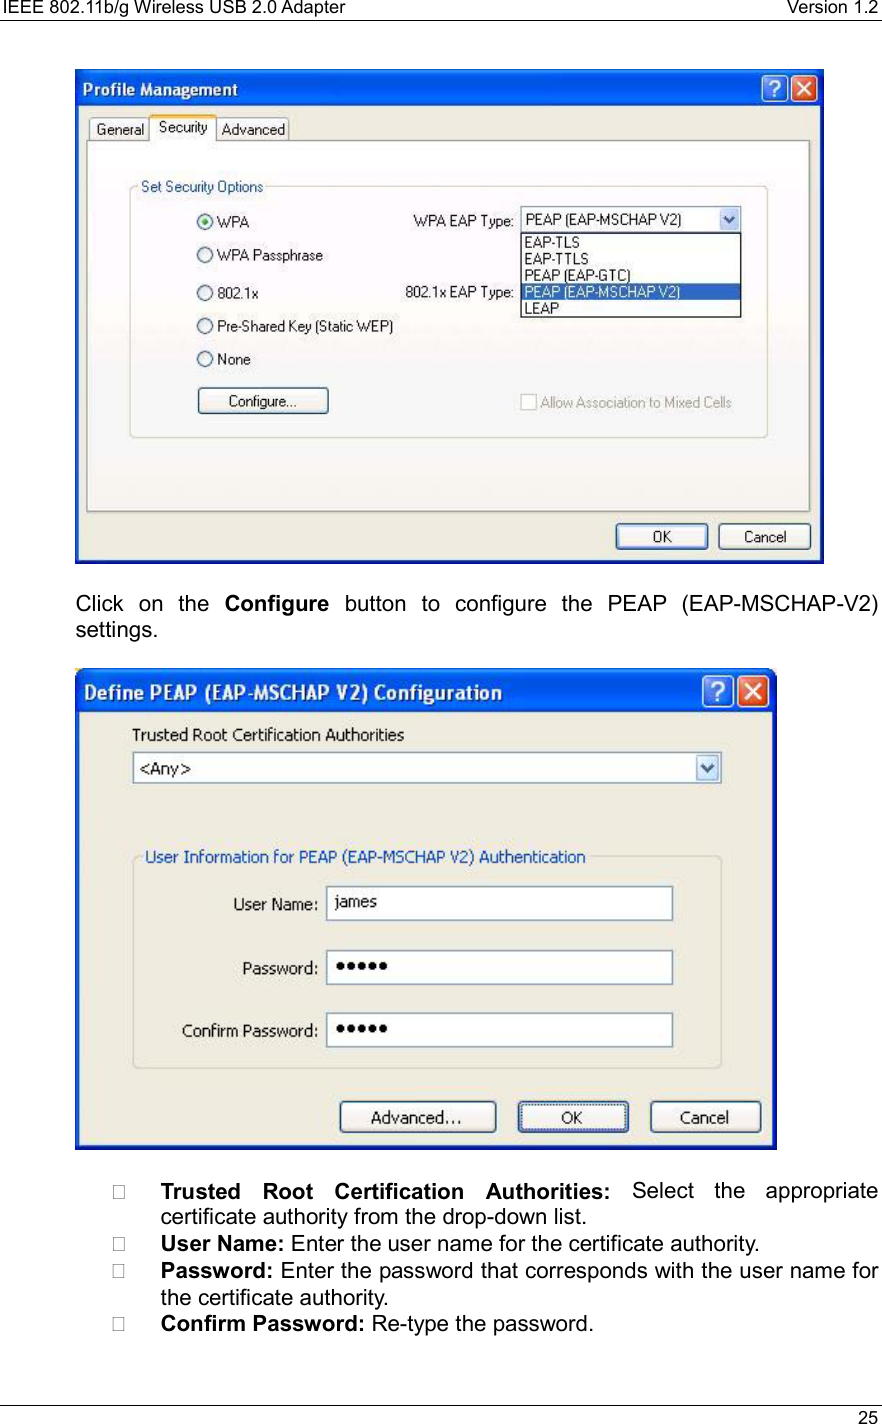 IEEE 802.11b/g Wireless USB 2.0 Adapter    Version 1.2   25    Click on the Configure button to configure the PEAP (EAP-MSCHAP-V2) settings.      Trusted Root Certification Authorities: Select the appropriate certificate authority from the drop-down list.     User Name: Enter the user name for the certificate authority.   Password: Enter the password that corresponds with the user name for the certificate authority.   Confirm Password: Re-type the password.   